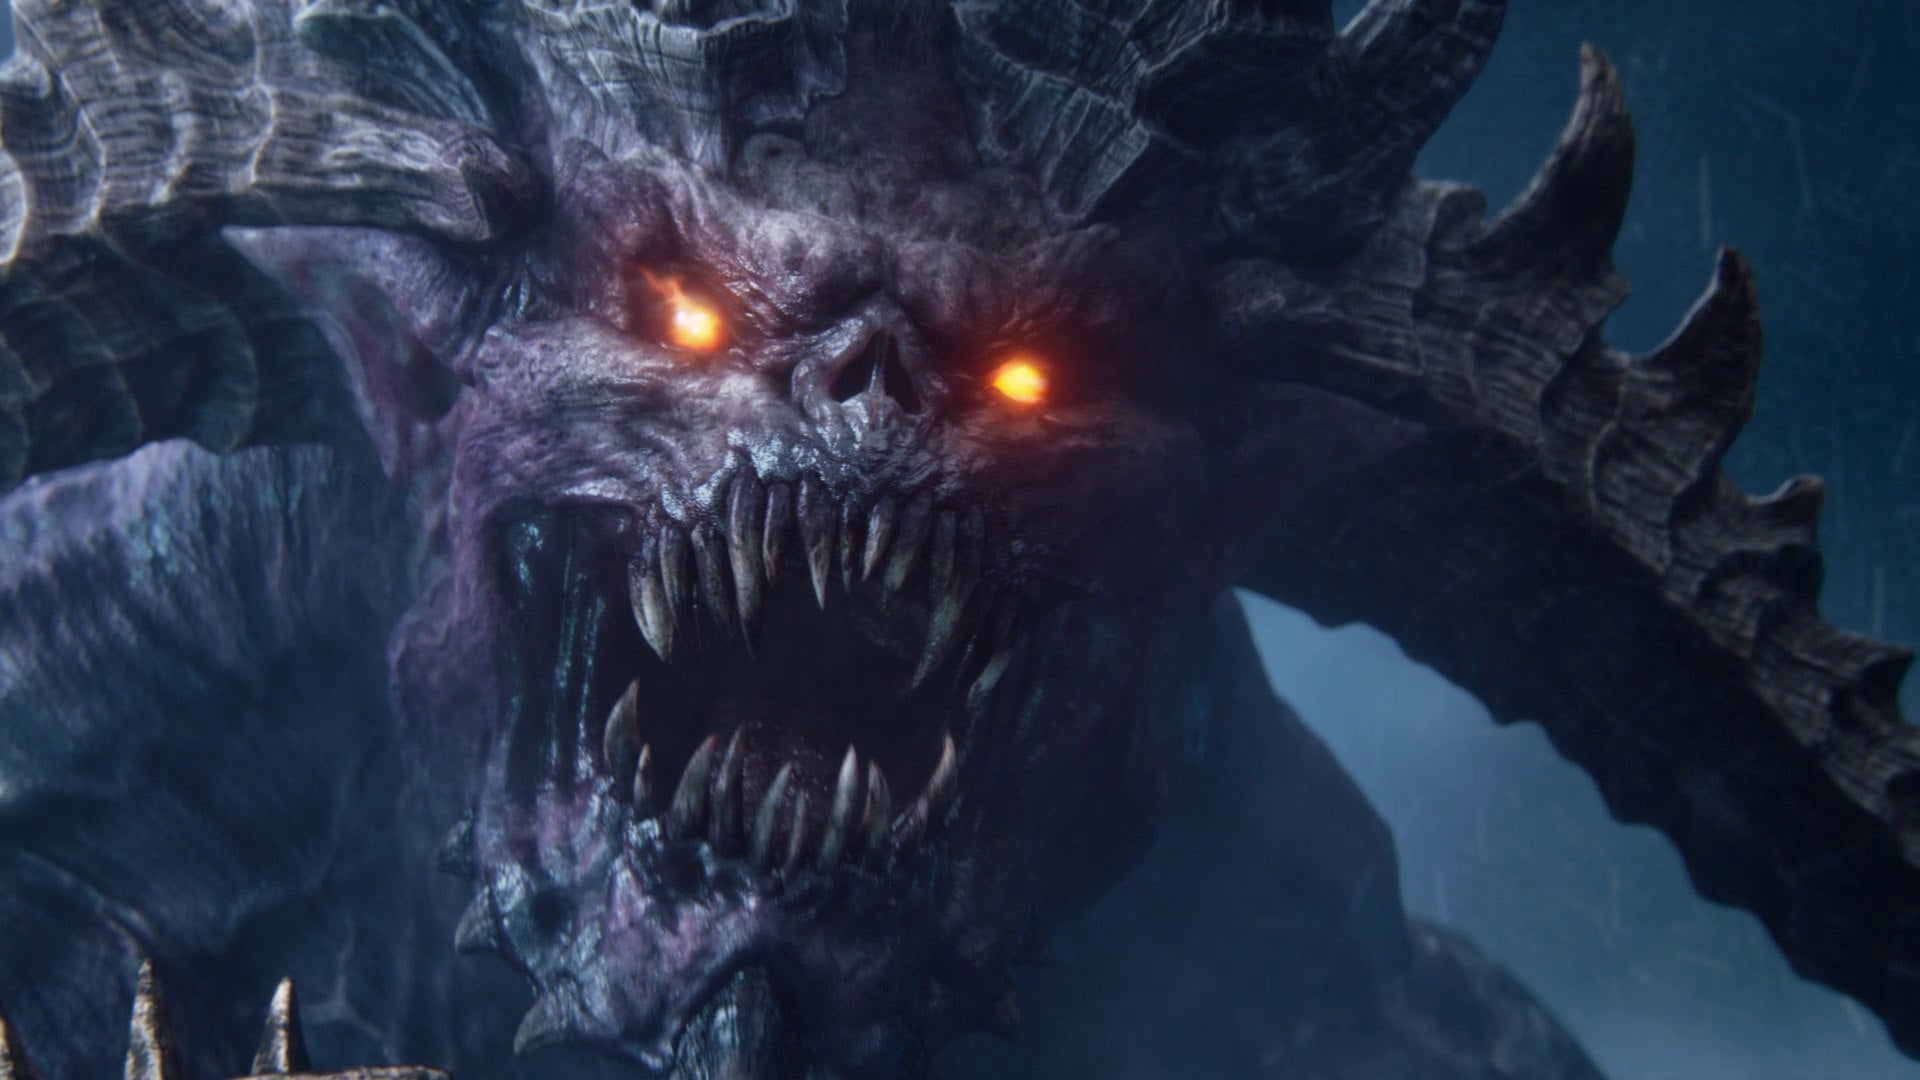 A big Chaos nastie in the Total War: Warhammer 3 cinematic trailer.